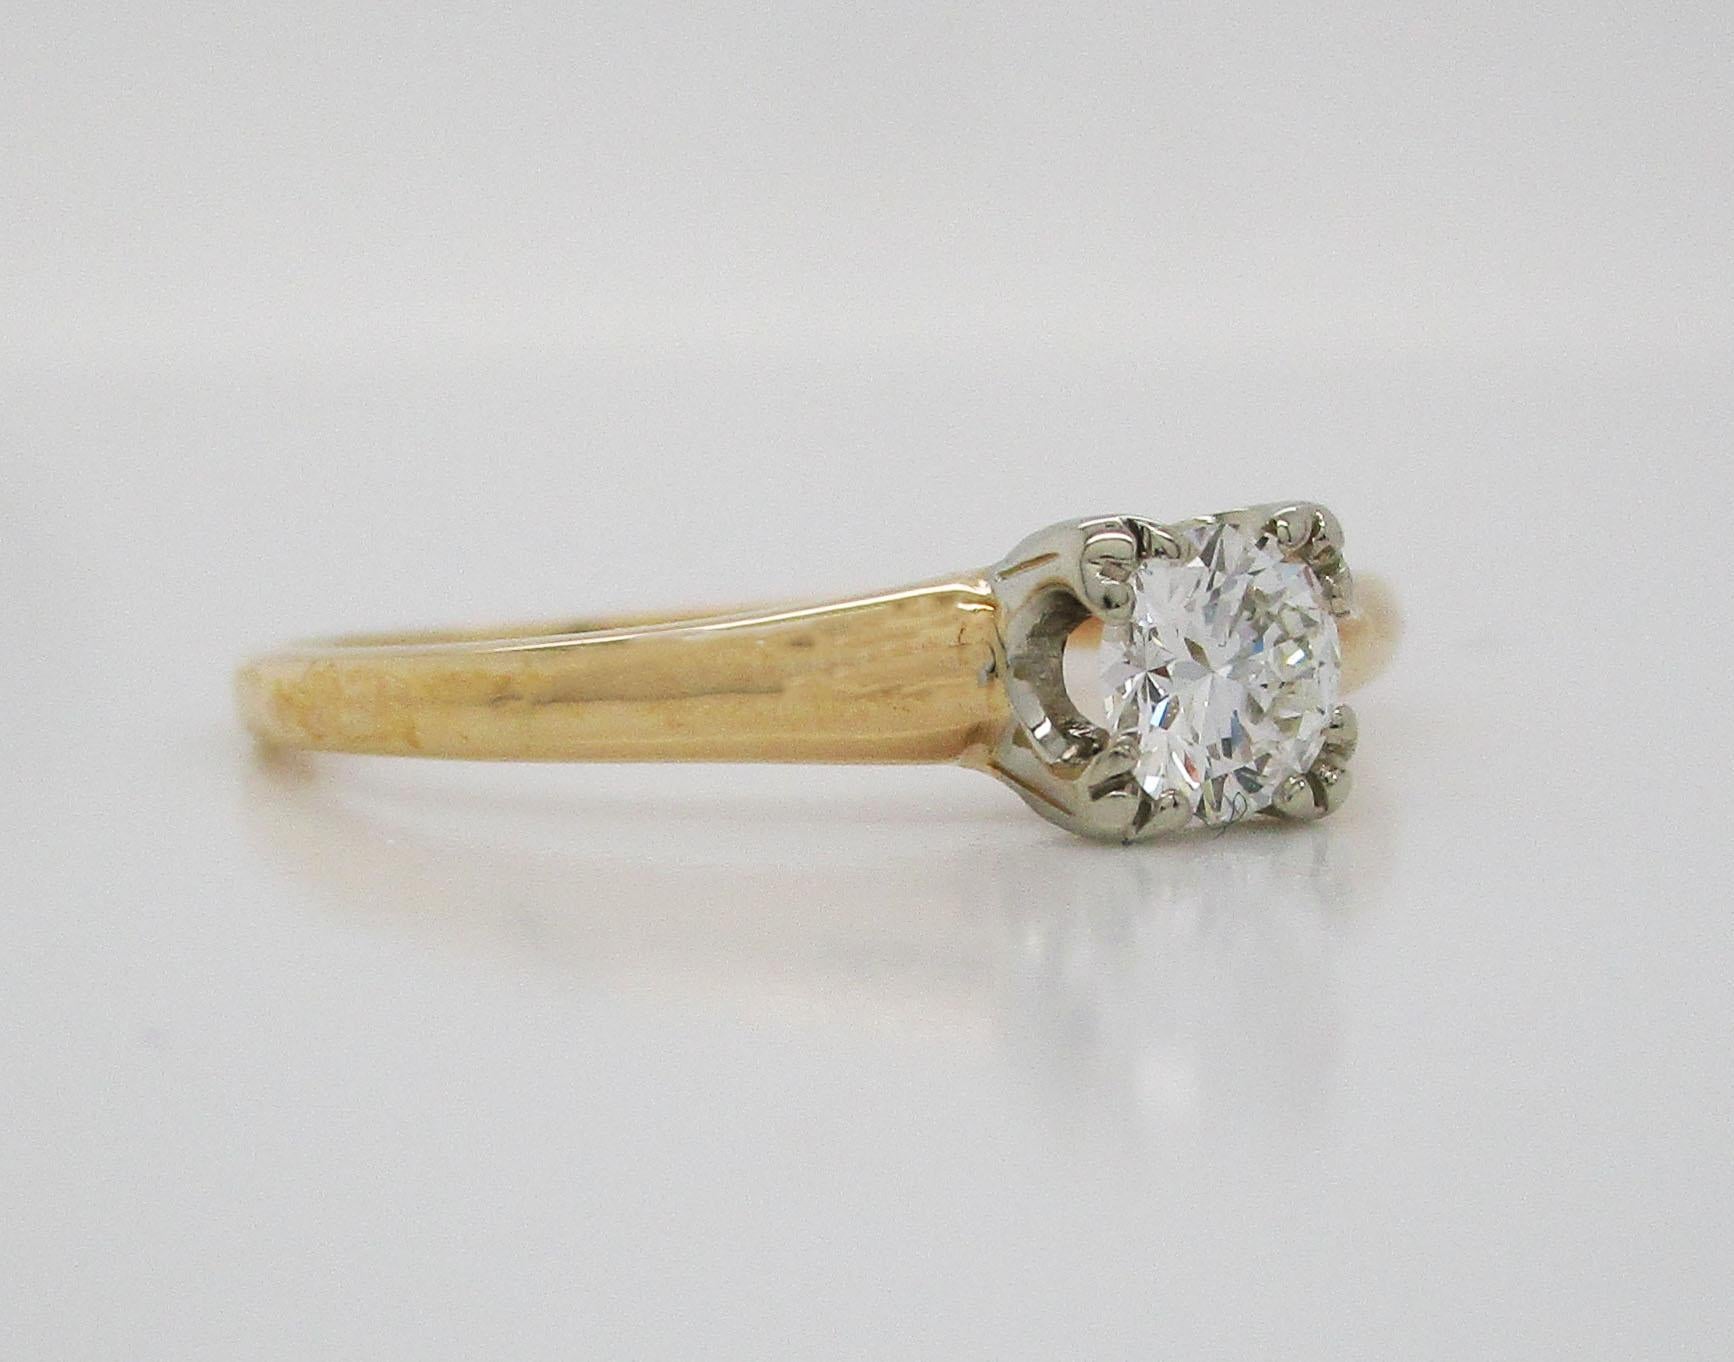 This adorable engagement ring is in 14k yellow gold and features a 14k white gold head, in which a stunning diamond is set! This is the perfect engagement ring for someone who appreciates the classic look of a traditional engagement ring, but is